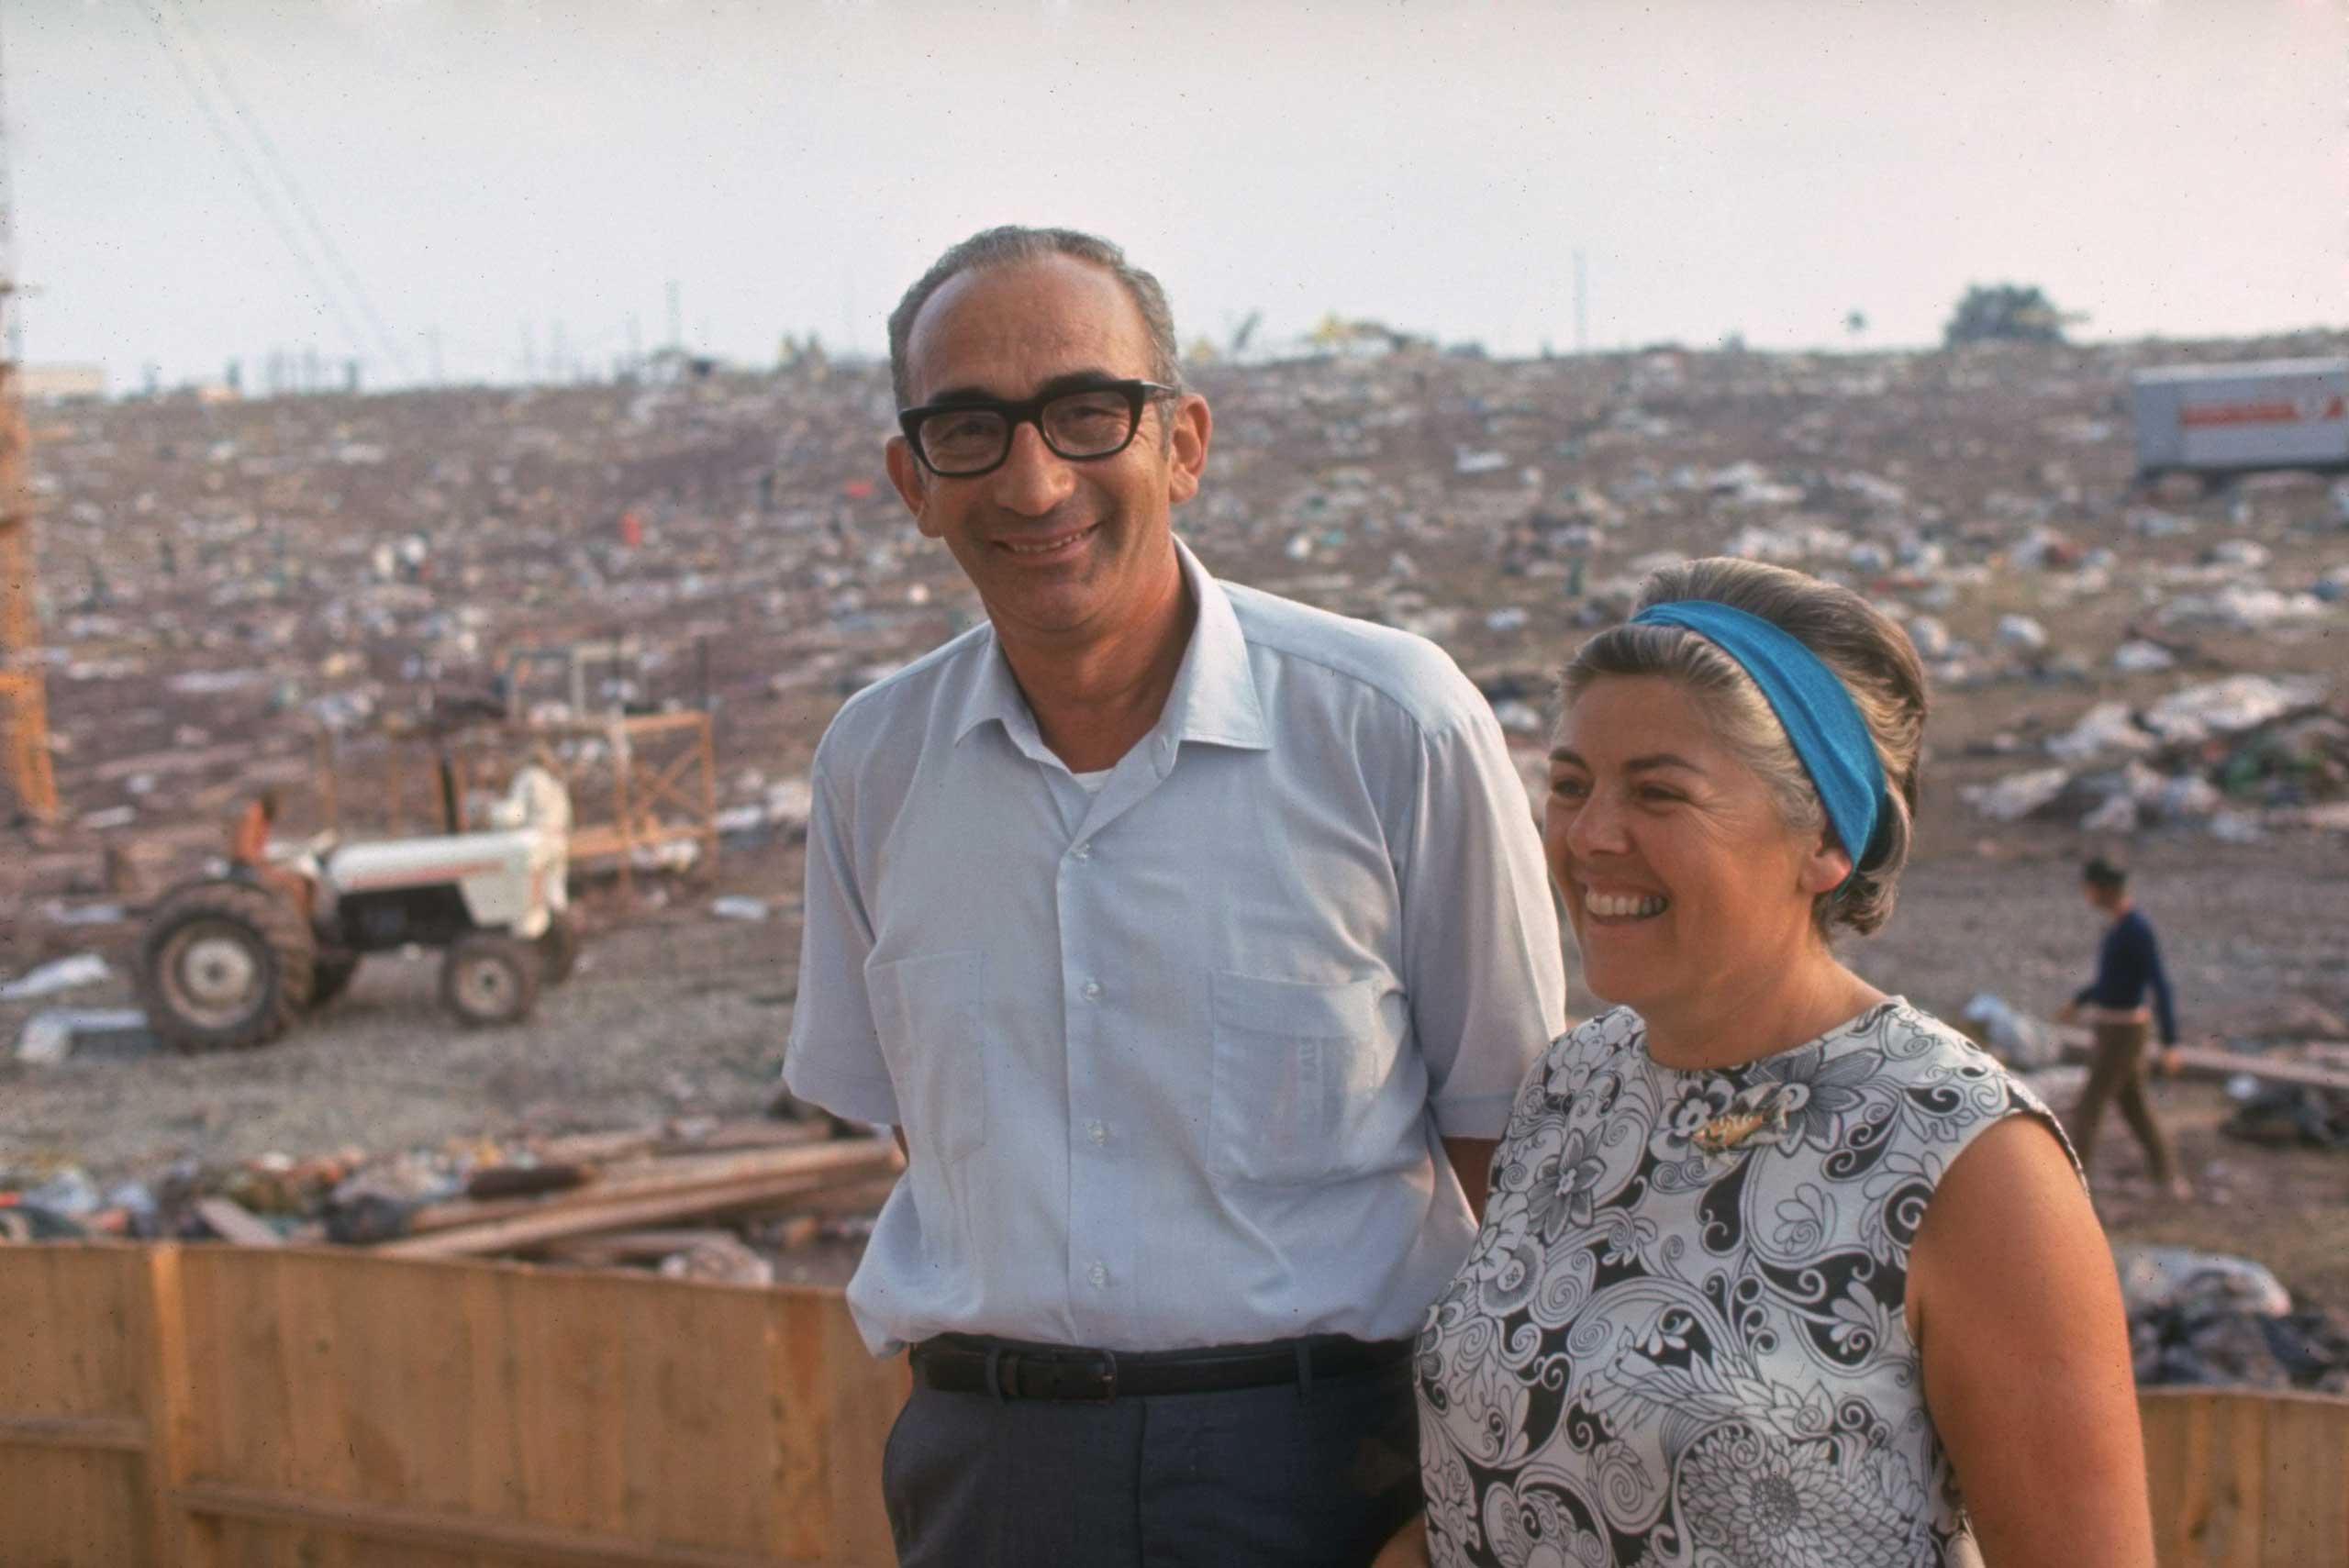 <b>Not published in LIFE.</b> Max and Miriam Yasgur on their land after the Woodstock Music &amp; Art Fair, August 1969. (Bill Eppridge&mdash;Time &amp; Life Pictures/Getty Images)